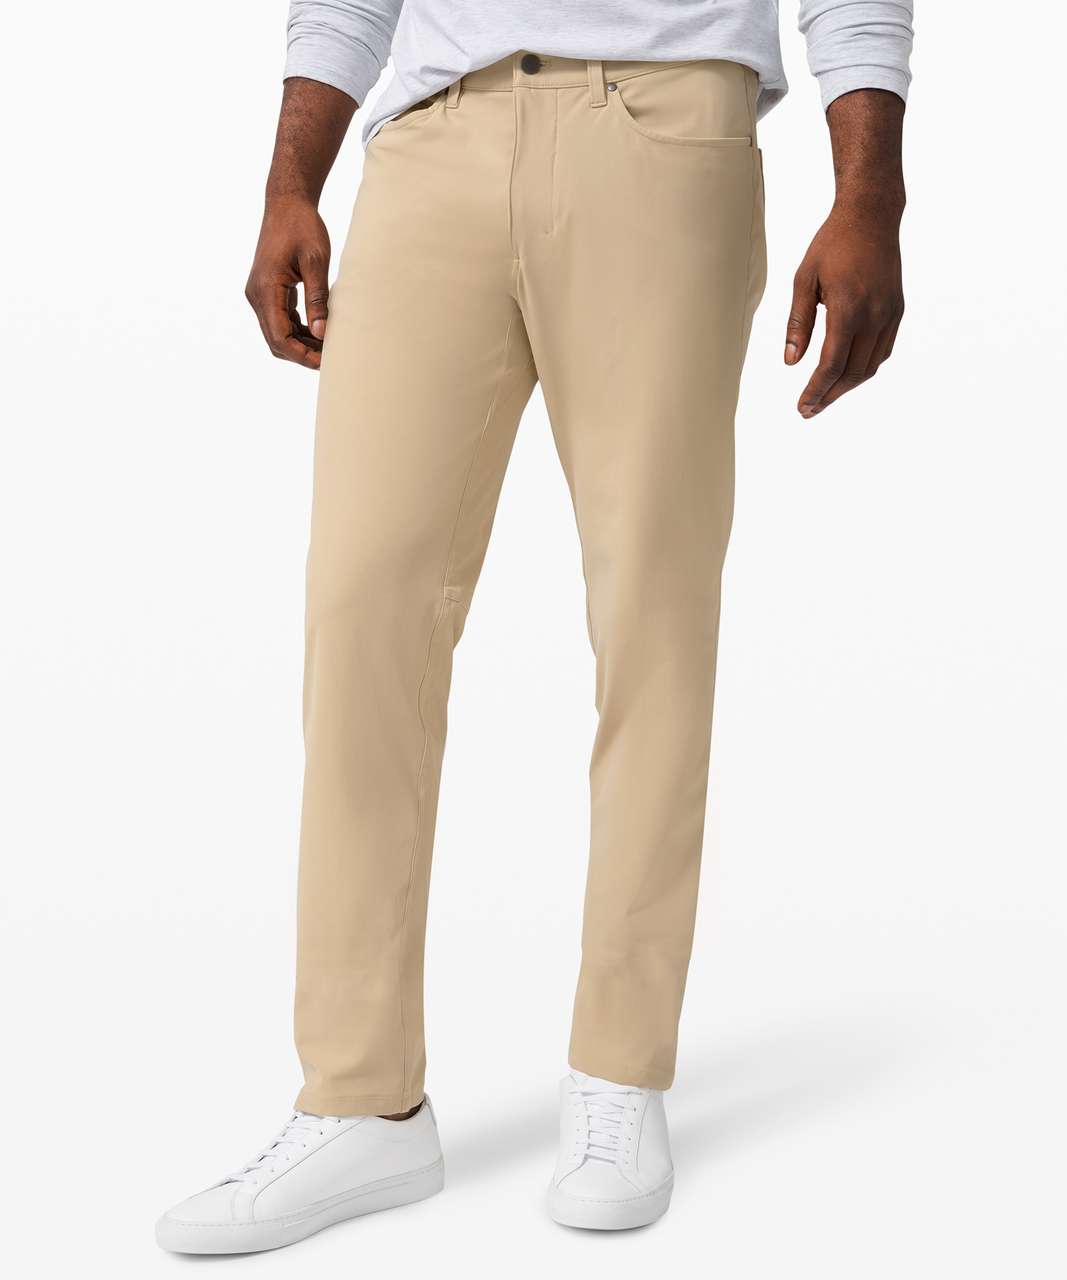 Lululemon ABC Pant Classic 30" *Warpstreme - Trench (First Release)